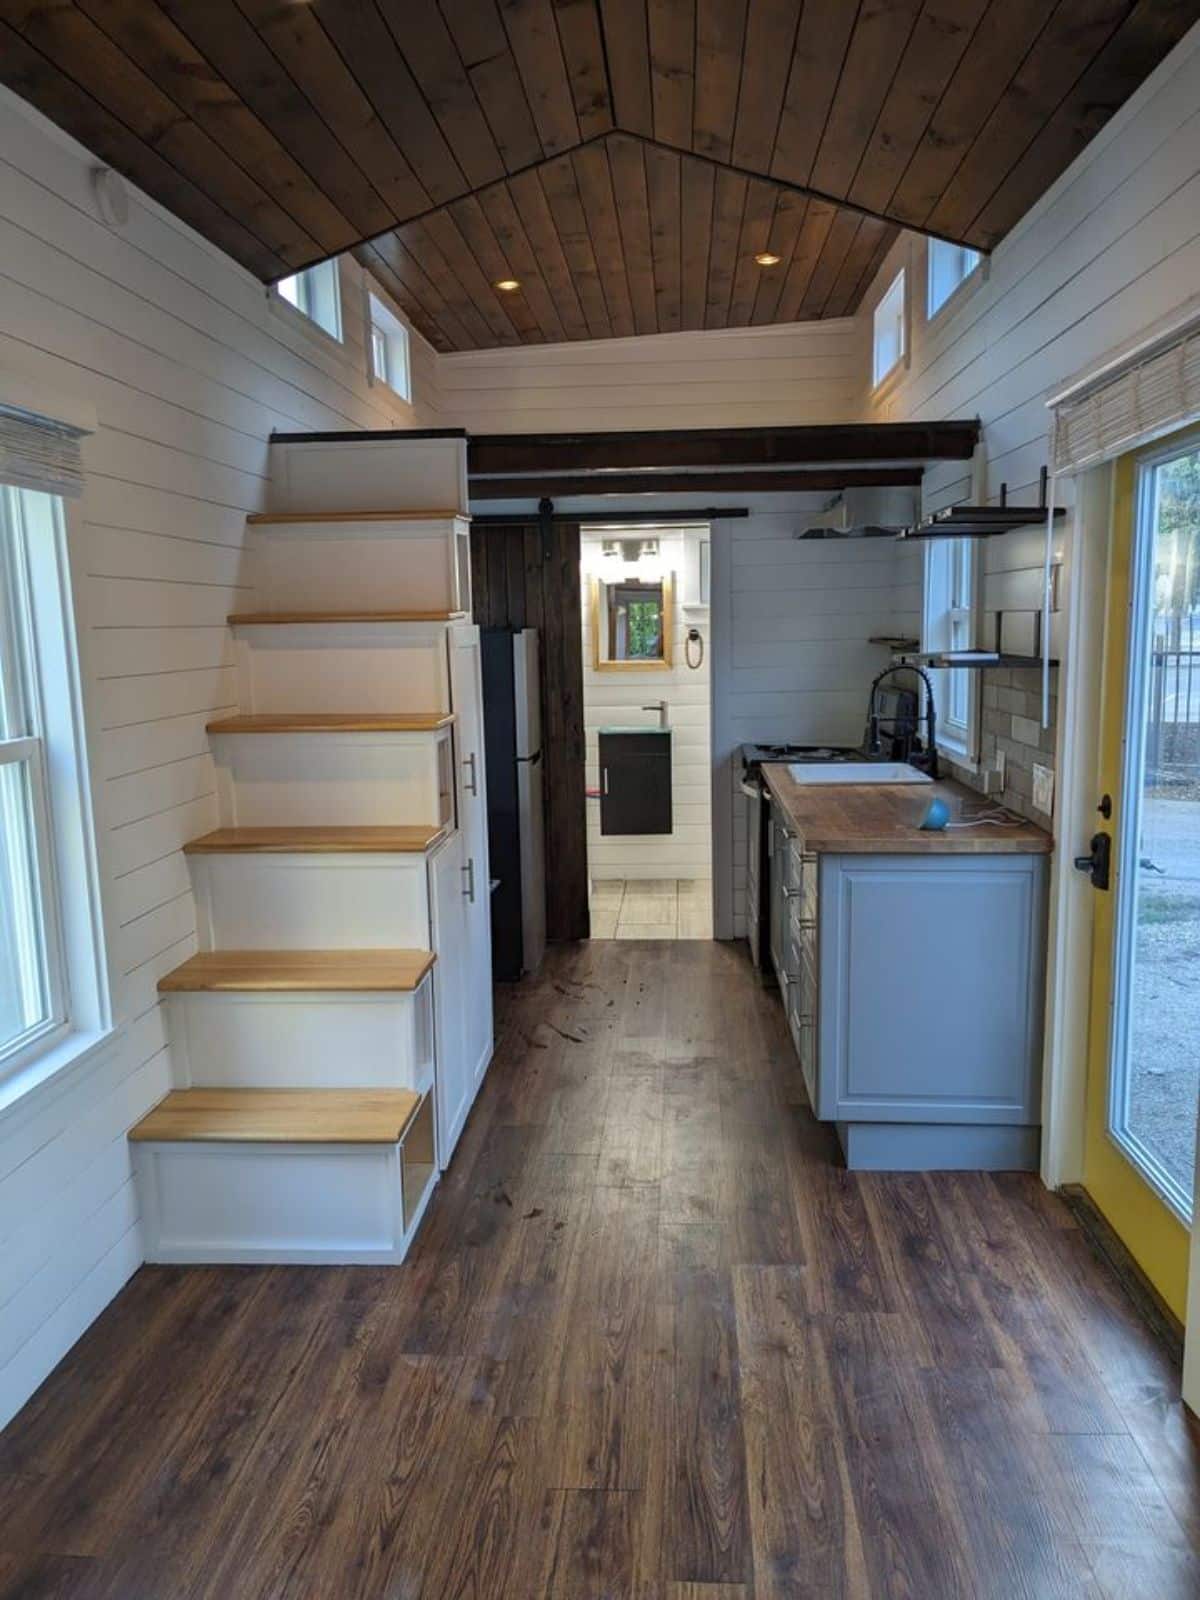 full length interior view of 26' tiny home on wheels